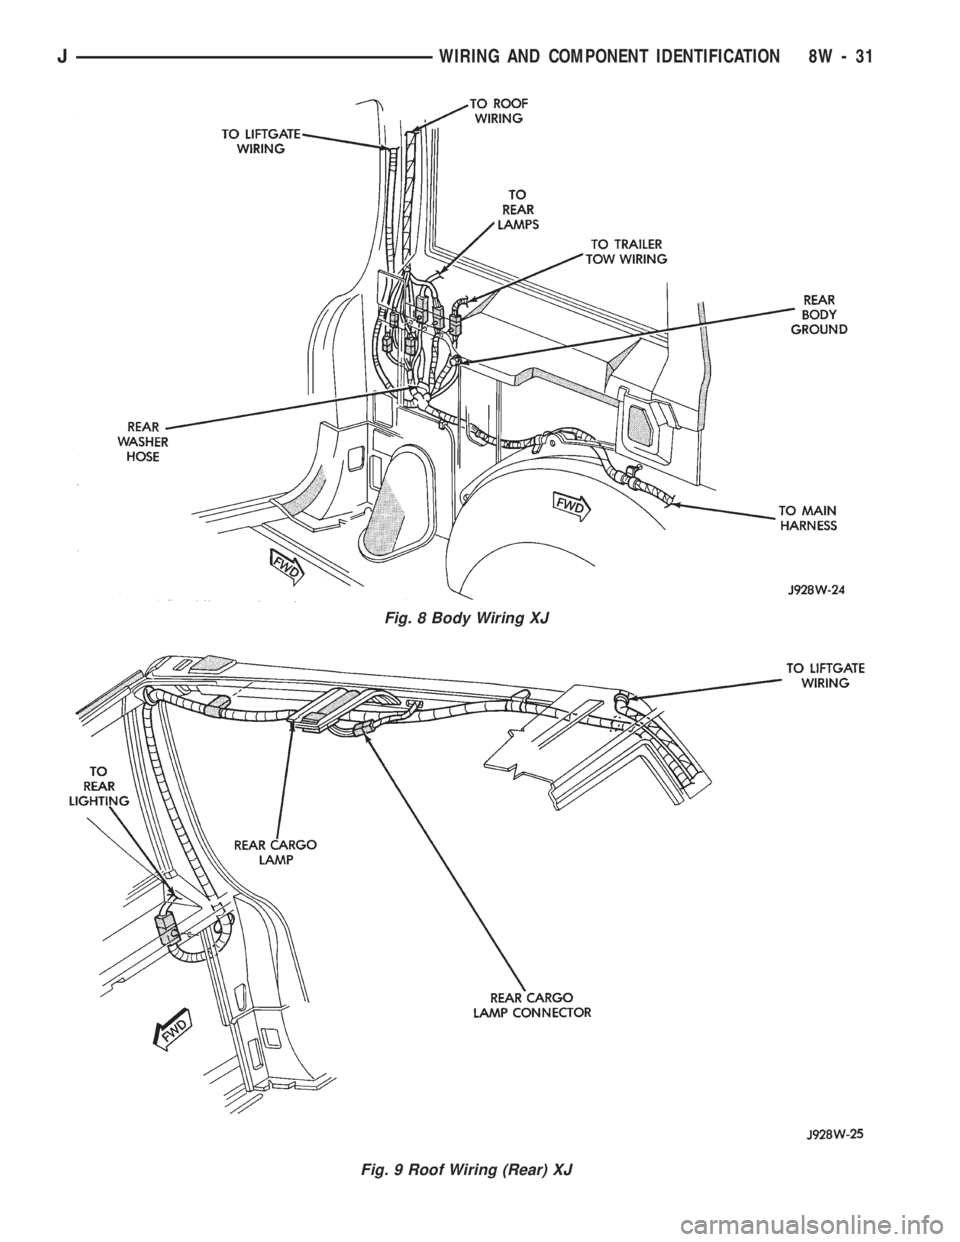 JEEP WRANGLER 1994  Owners Manual Fig. 9 Roof Wiring (Rear) XJ
JWIRING AND COMPONENT IDENTIFICATION 8W - 31 